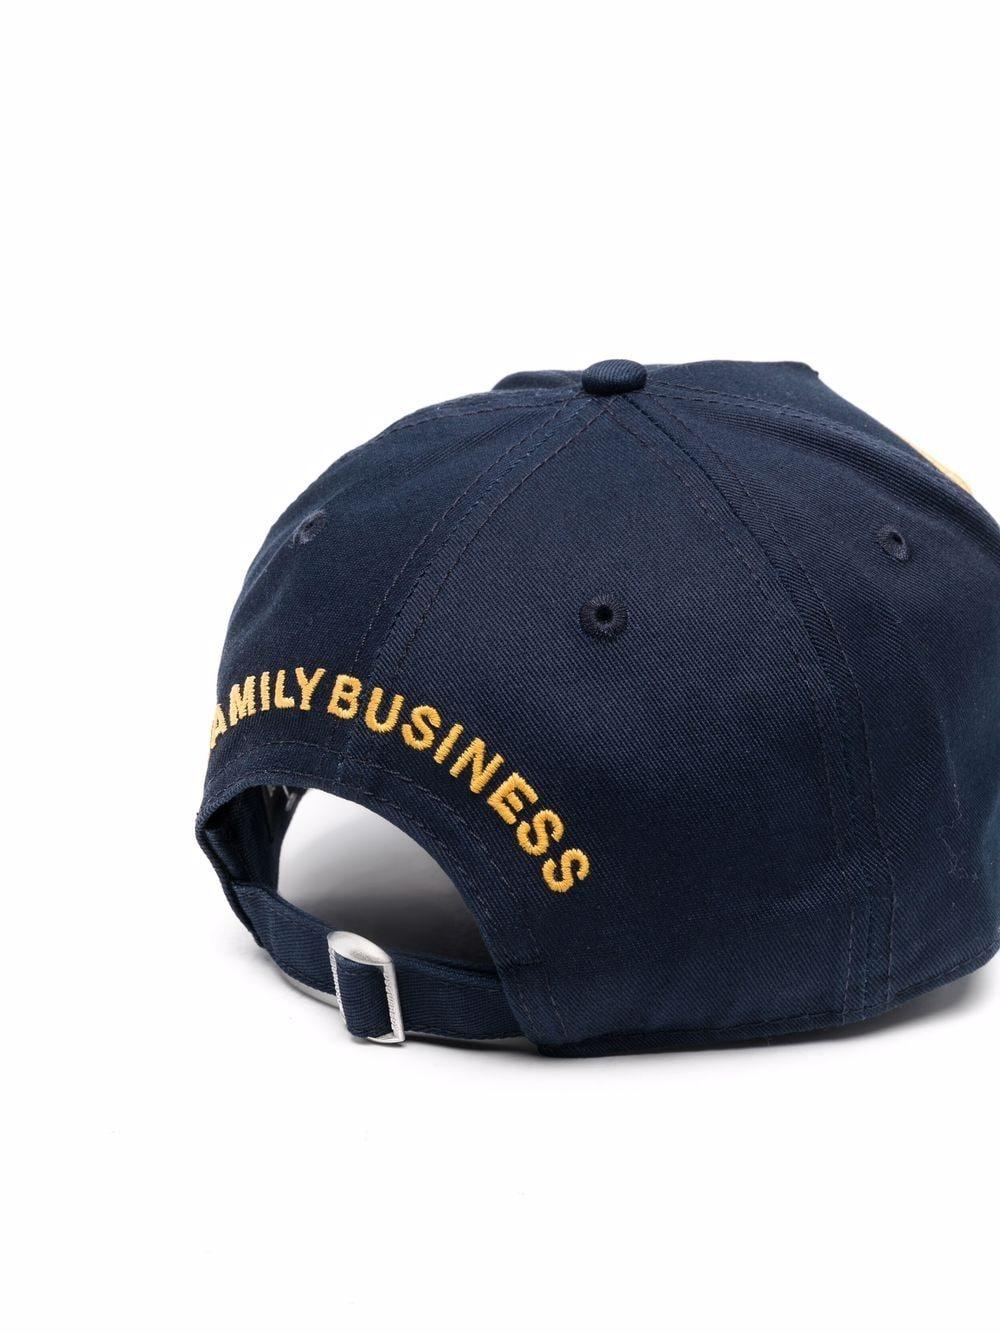 DSquared² Born In Canada Badge Navy Blue Baseball Cap for Men | Lyst